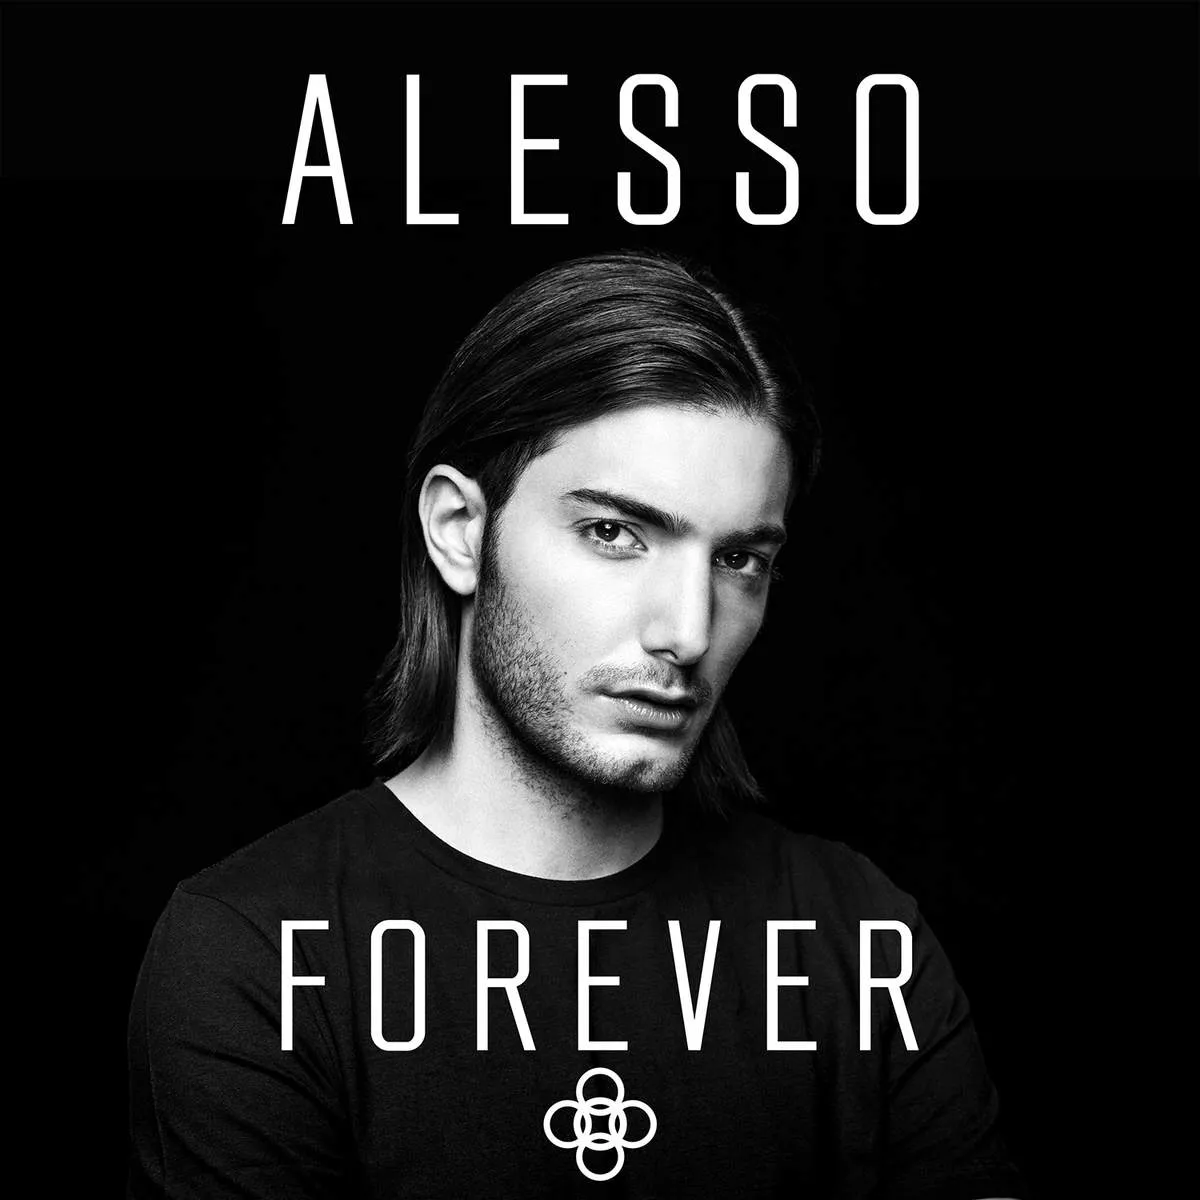 Forever - Alesso